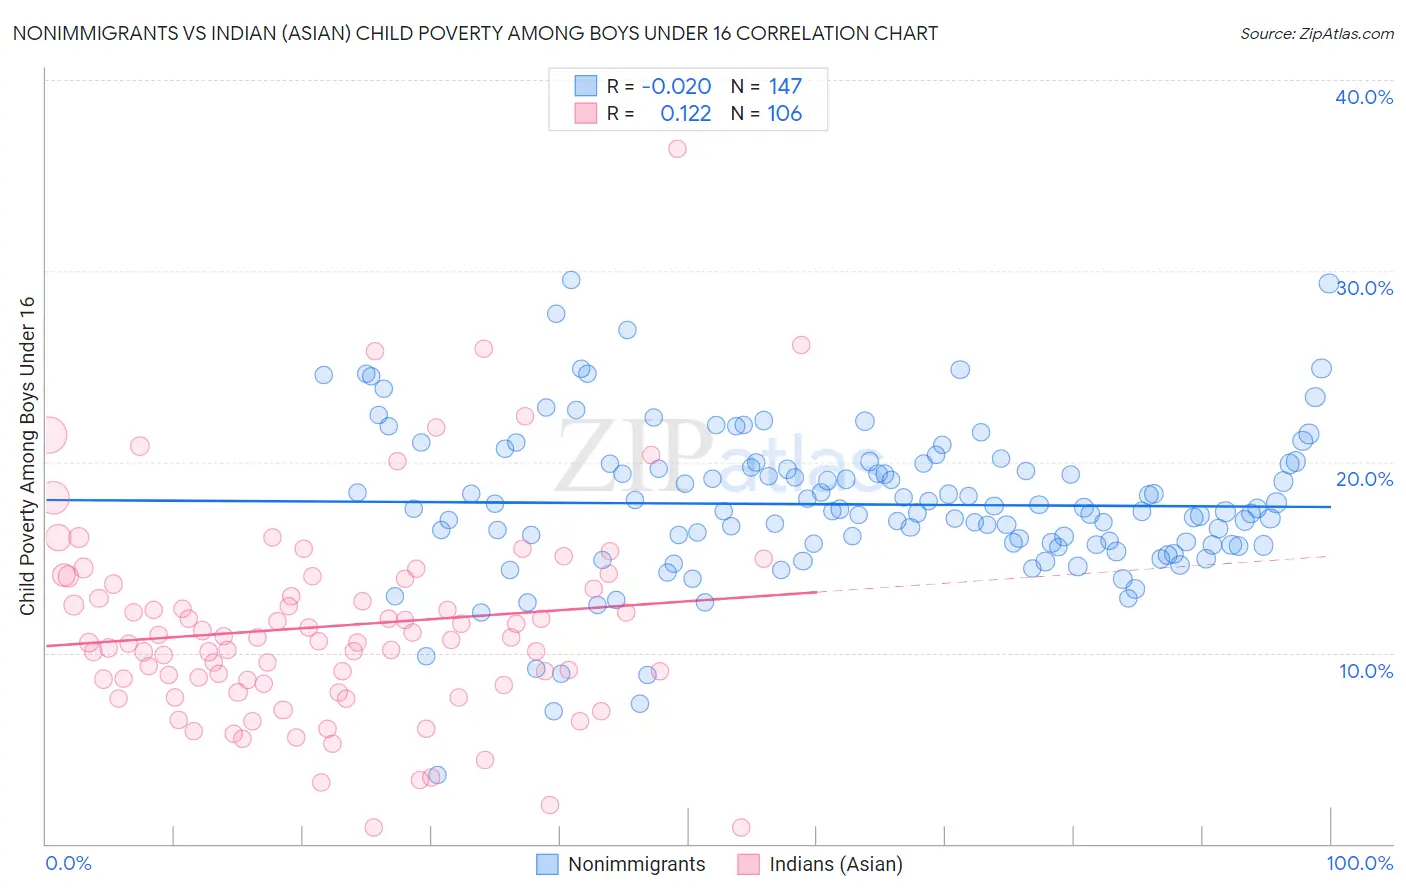 Nonimmigrants vs Indian (Asian) Child Poverty Among Boys Under 16